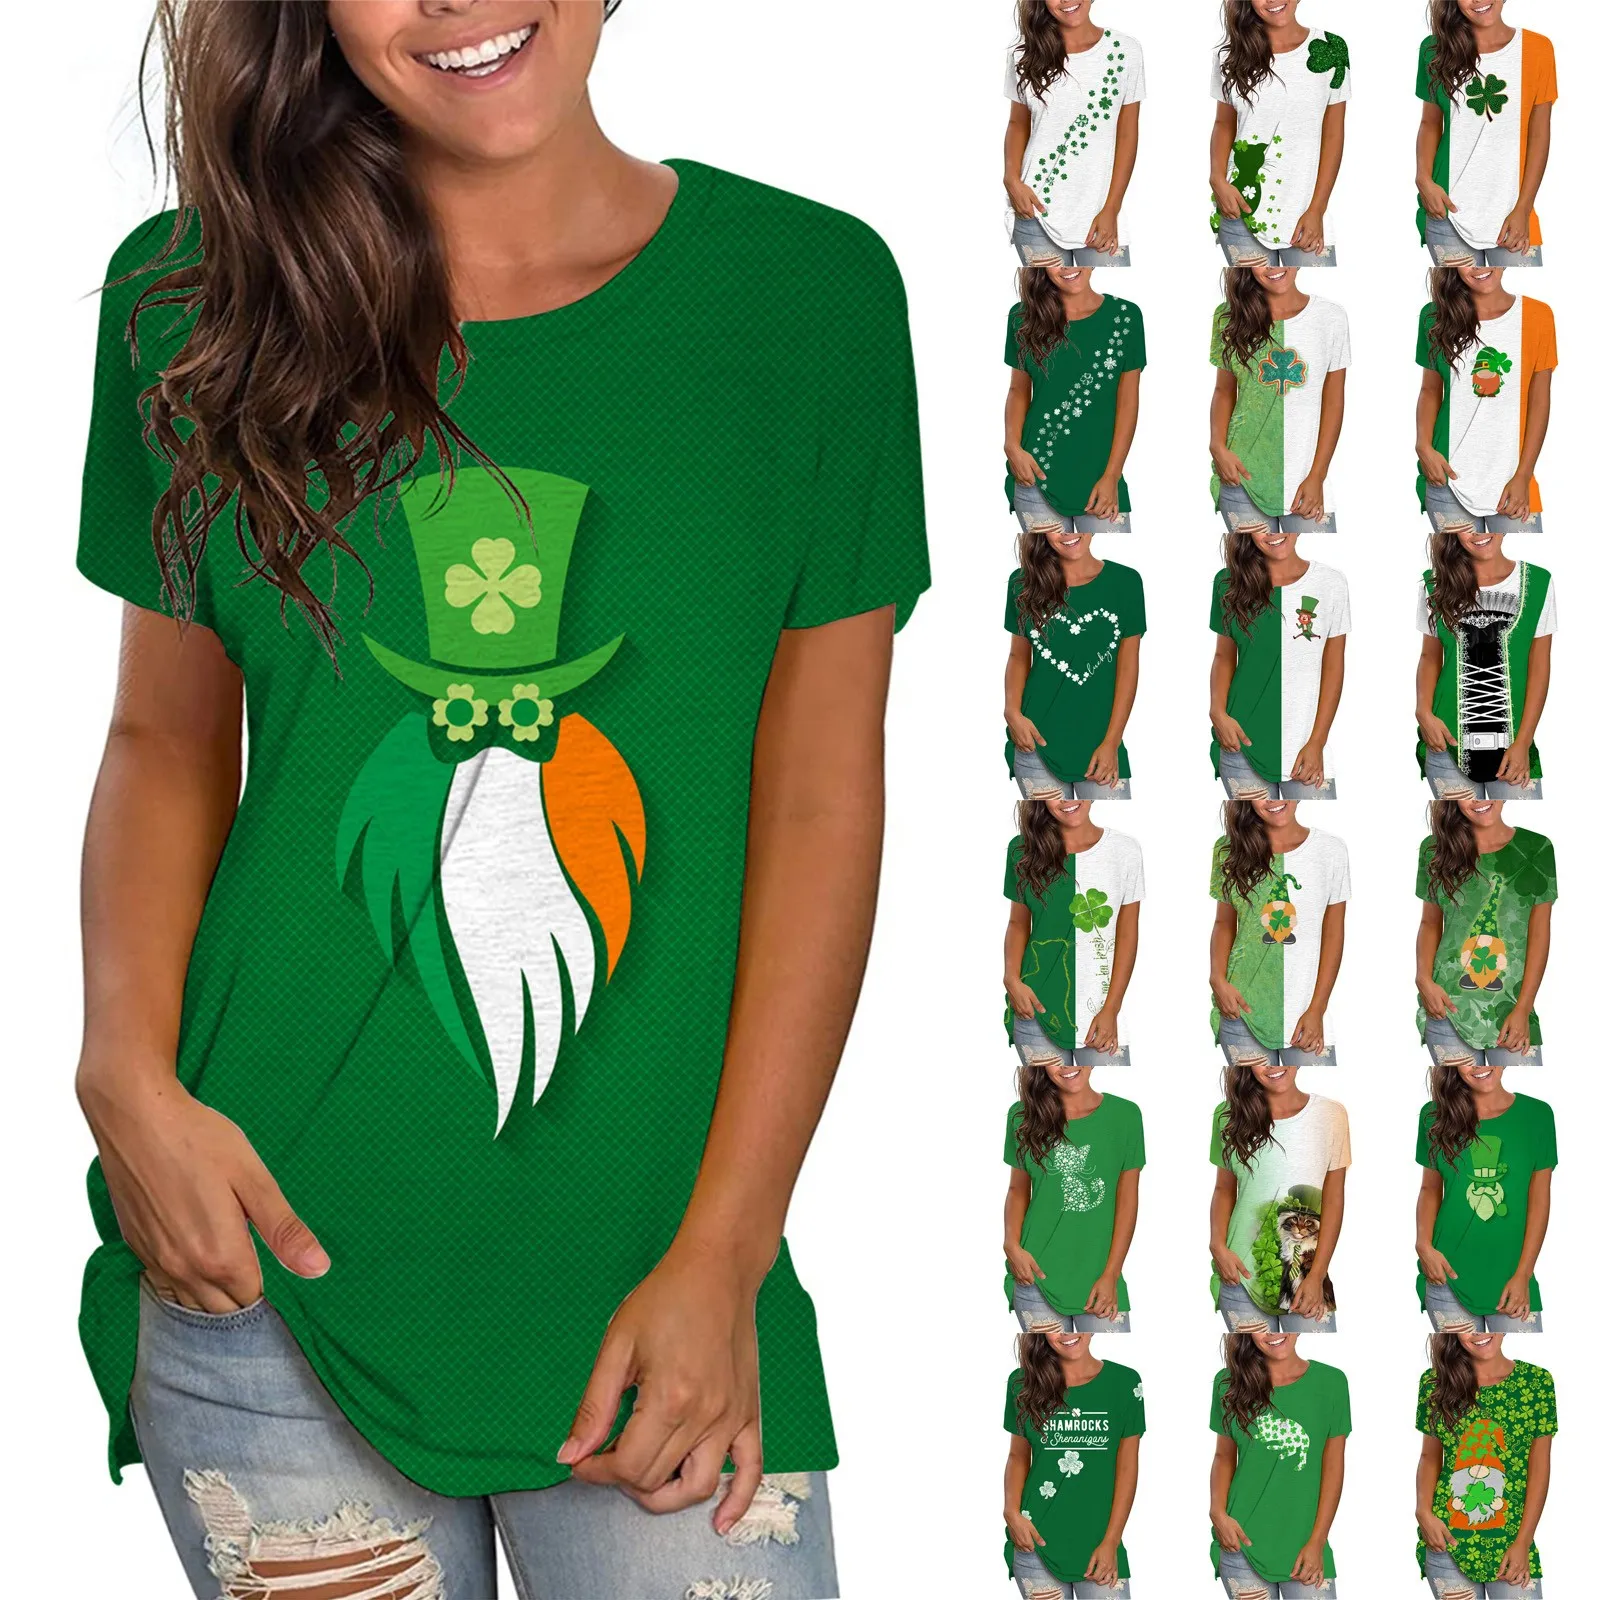 Patrick’s Day Short Sleeve Tops Ladies T shirt Harajuku St Patricks Day Gift May The Luck Of the Irish Be With You Popular Tops friends t shirt